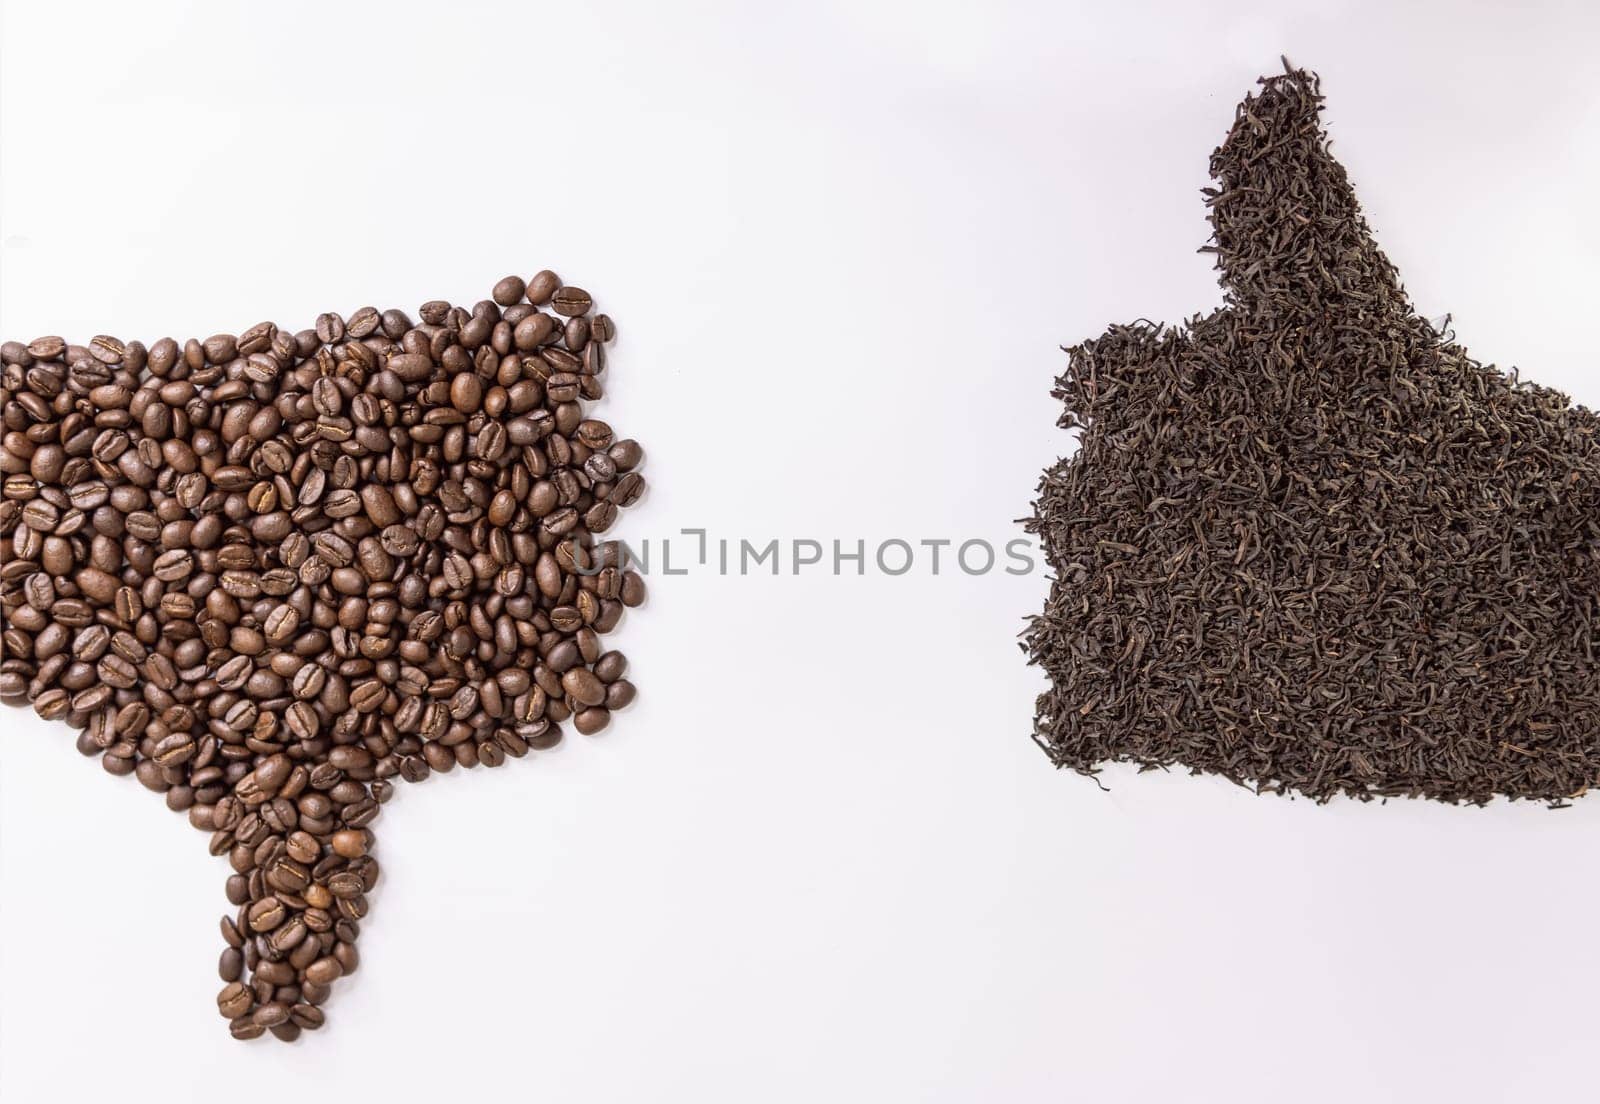 On a white background,human hands are lined with tea leaves and coffee by PopOff